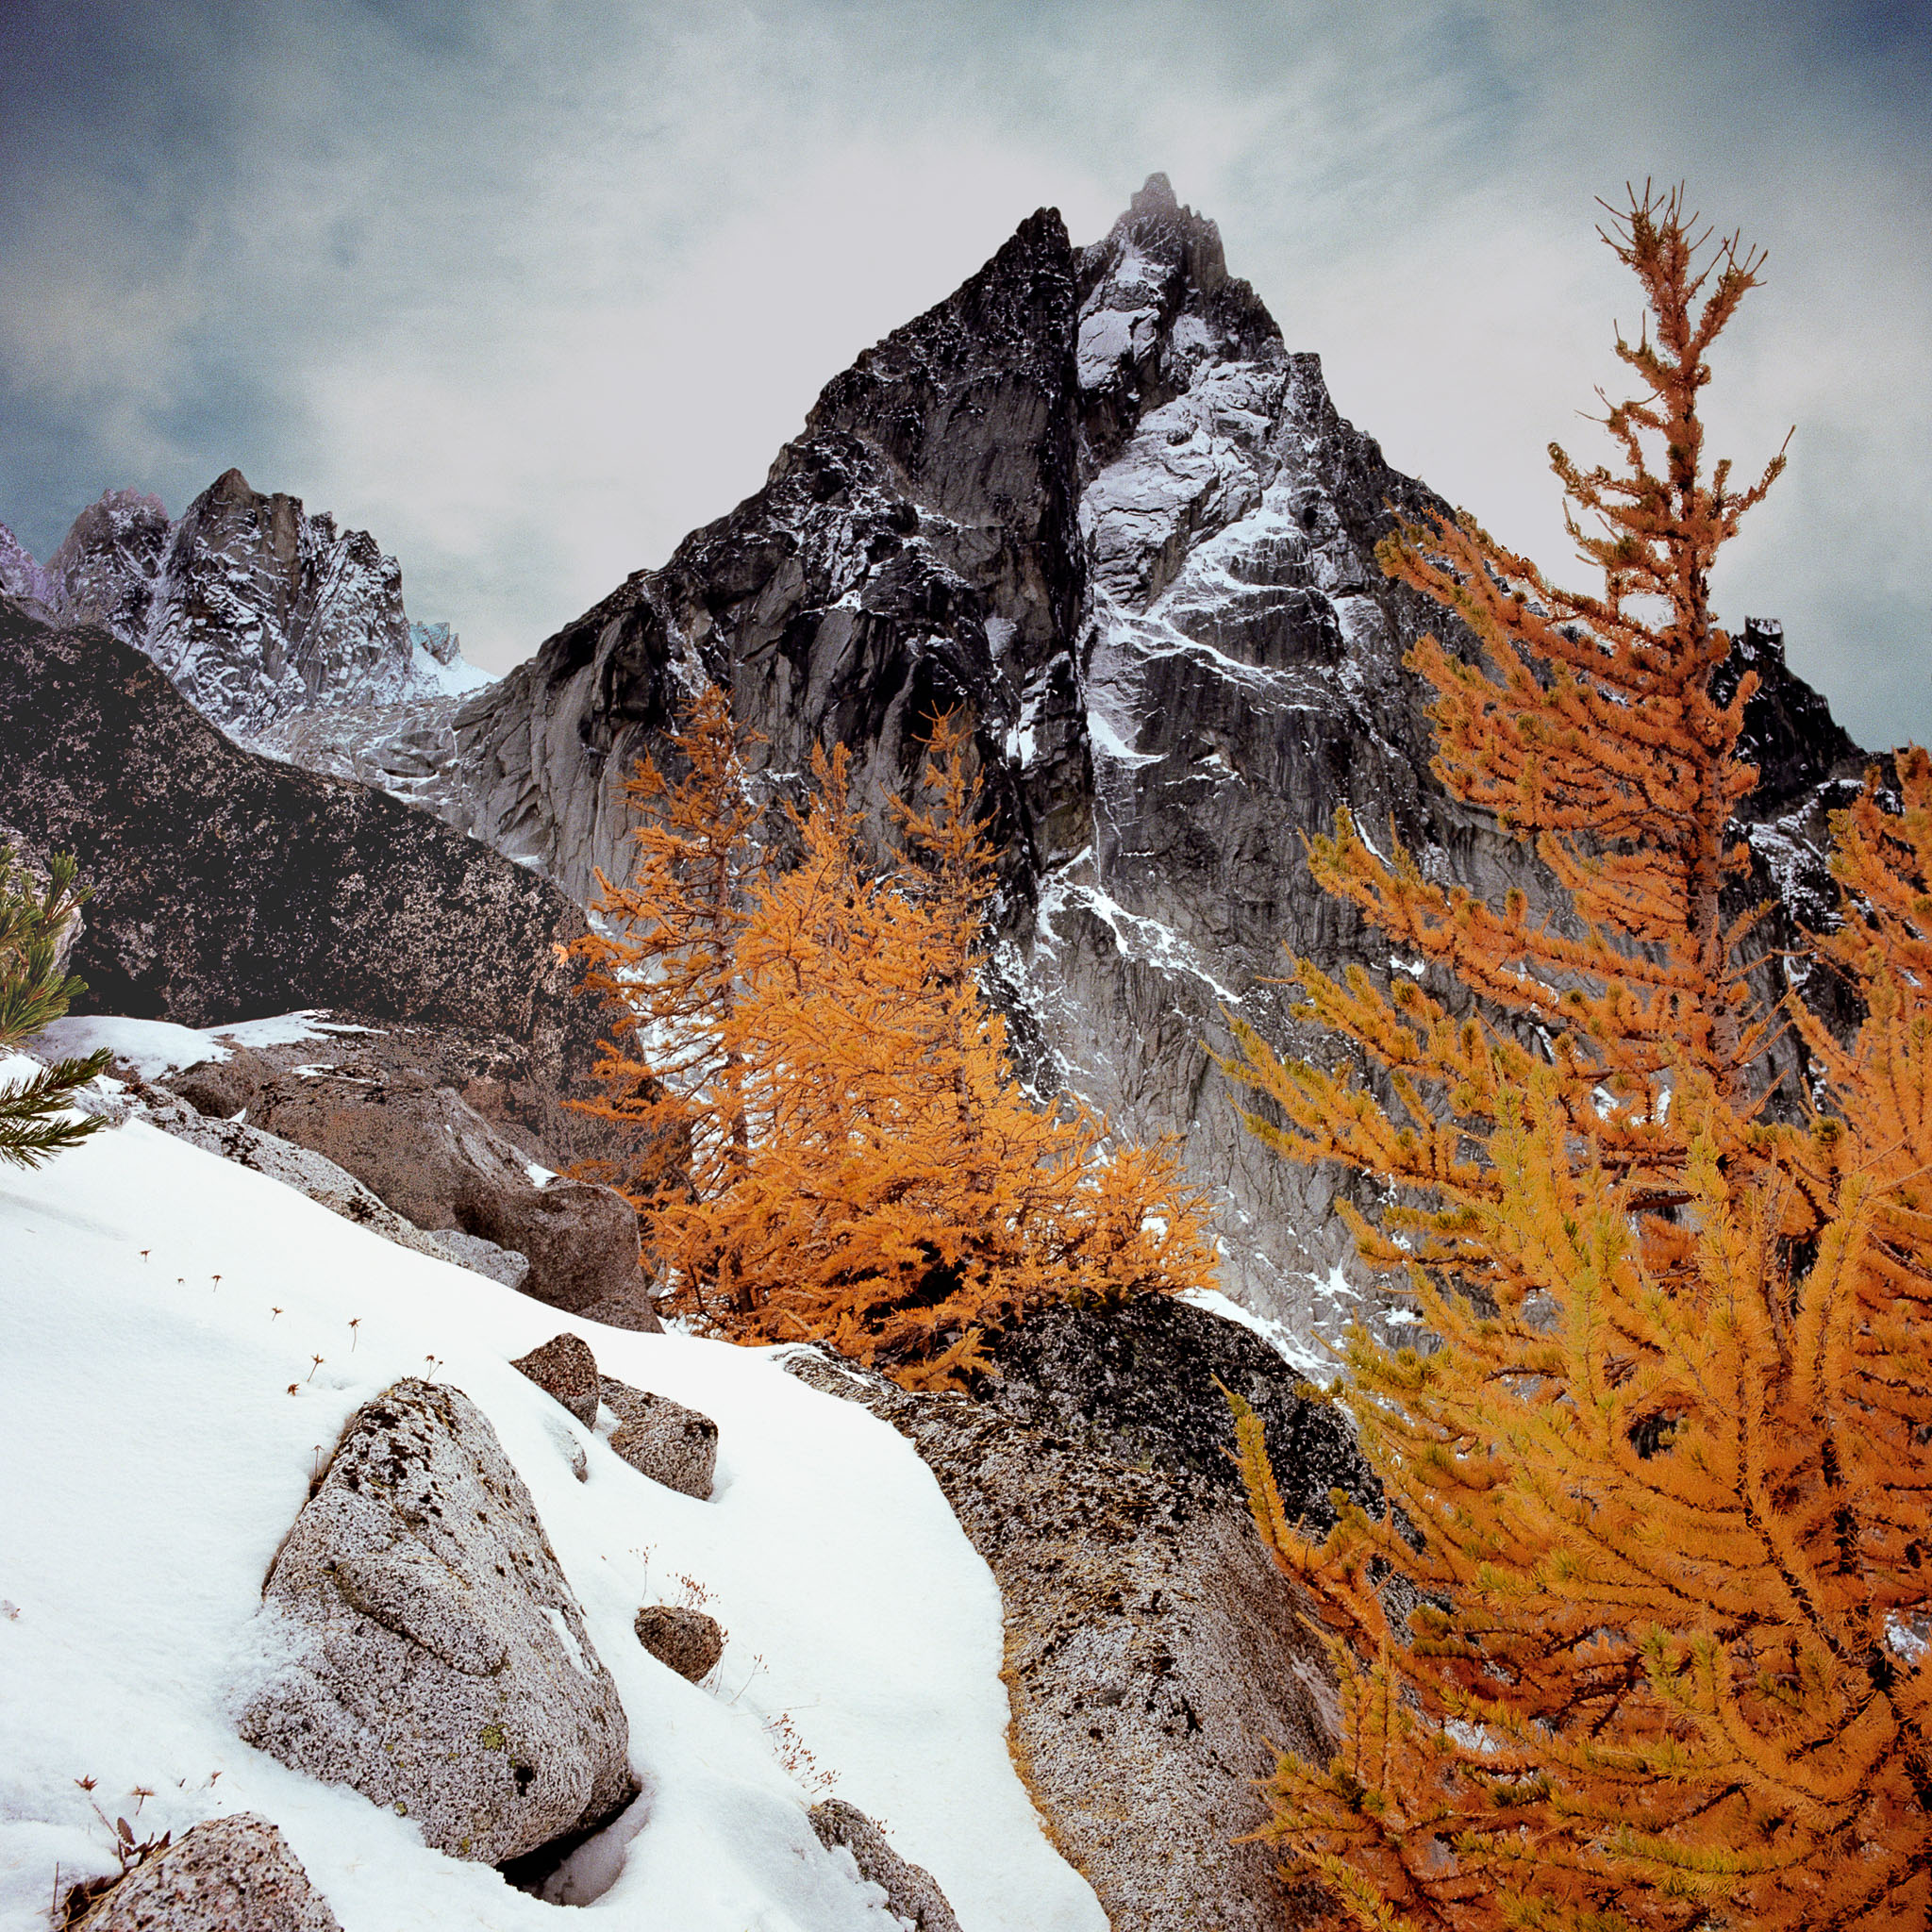 dragontail-peak-and-larch-tree-in-the-enchantments-near-levenworth-wa-8x8.jpg